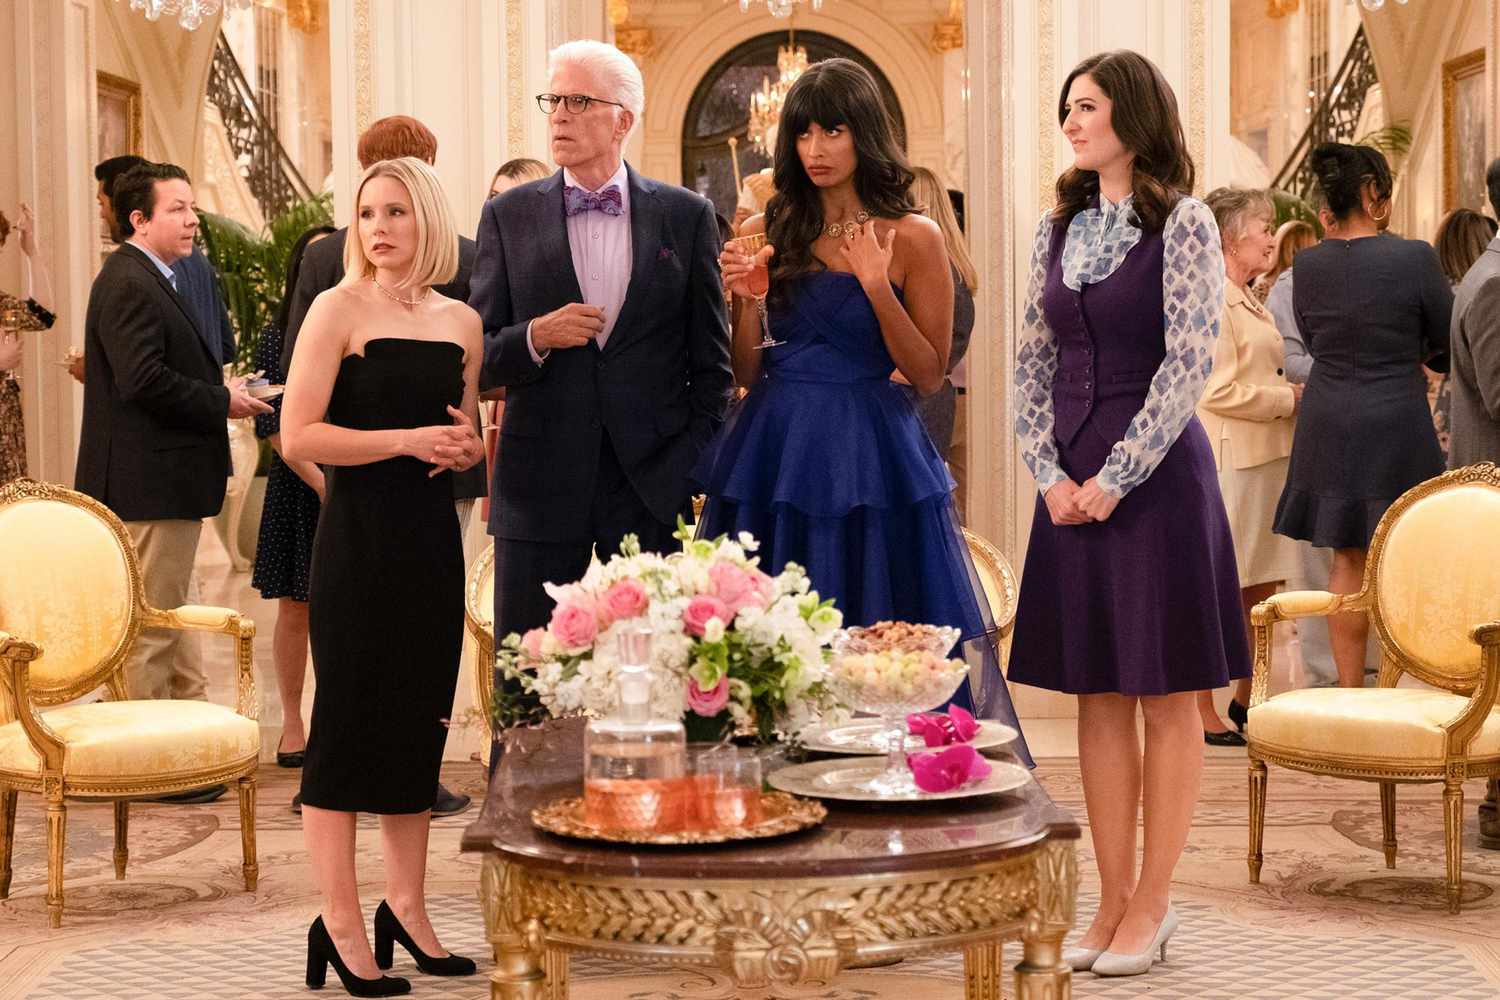 THE GOOD PLACE -- "A Girl From Arizona" Episode 401/402 -- Pictured: (l-r) Kristen Bell as Eleanor, Ted Danson as Michael, Jameela Jamil as Tahani, D'Arcy Carden as Janet -- (Photo by: Colleen Hayes/NBC)